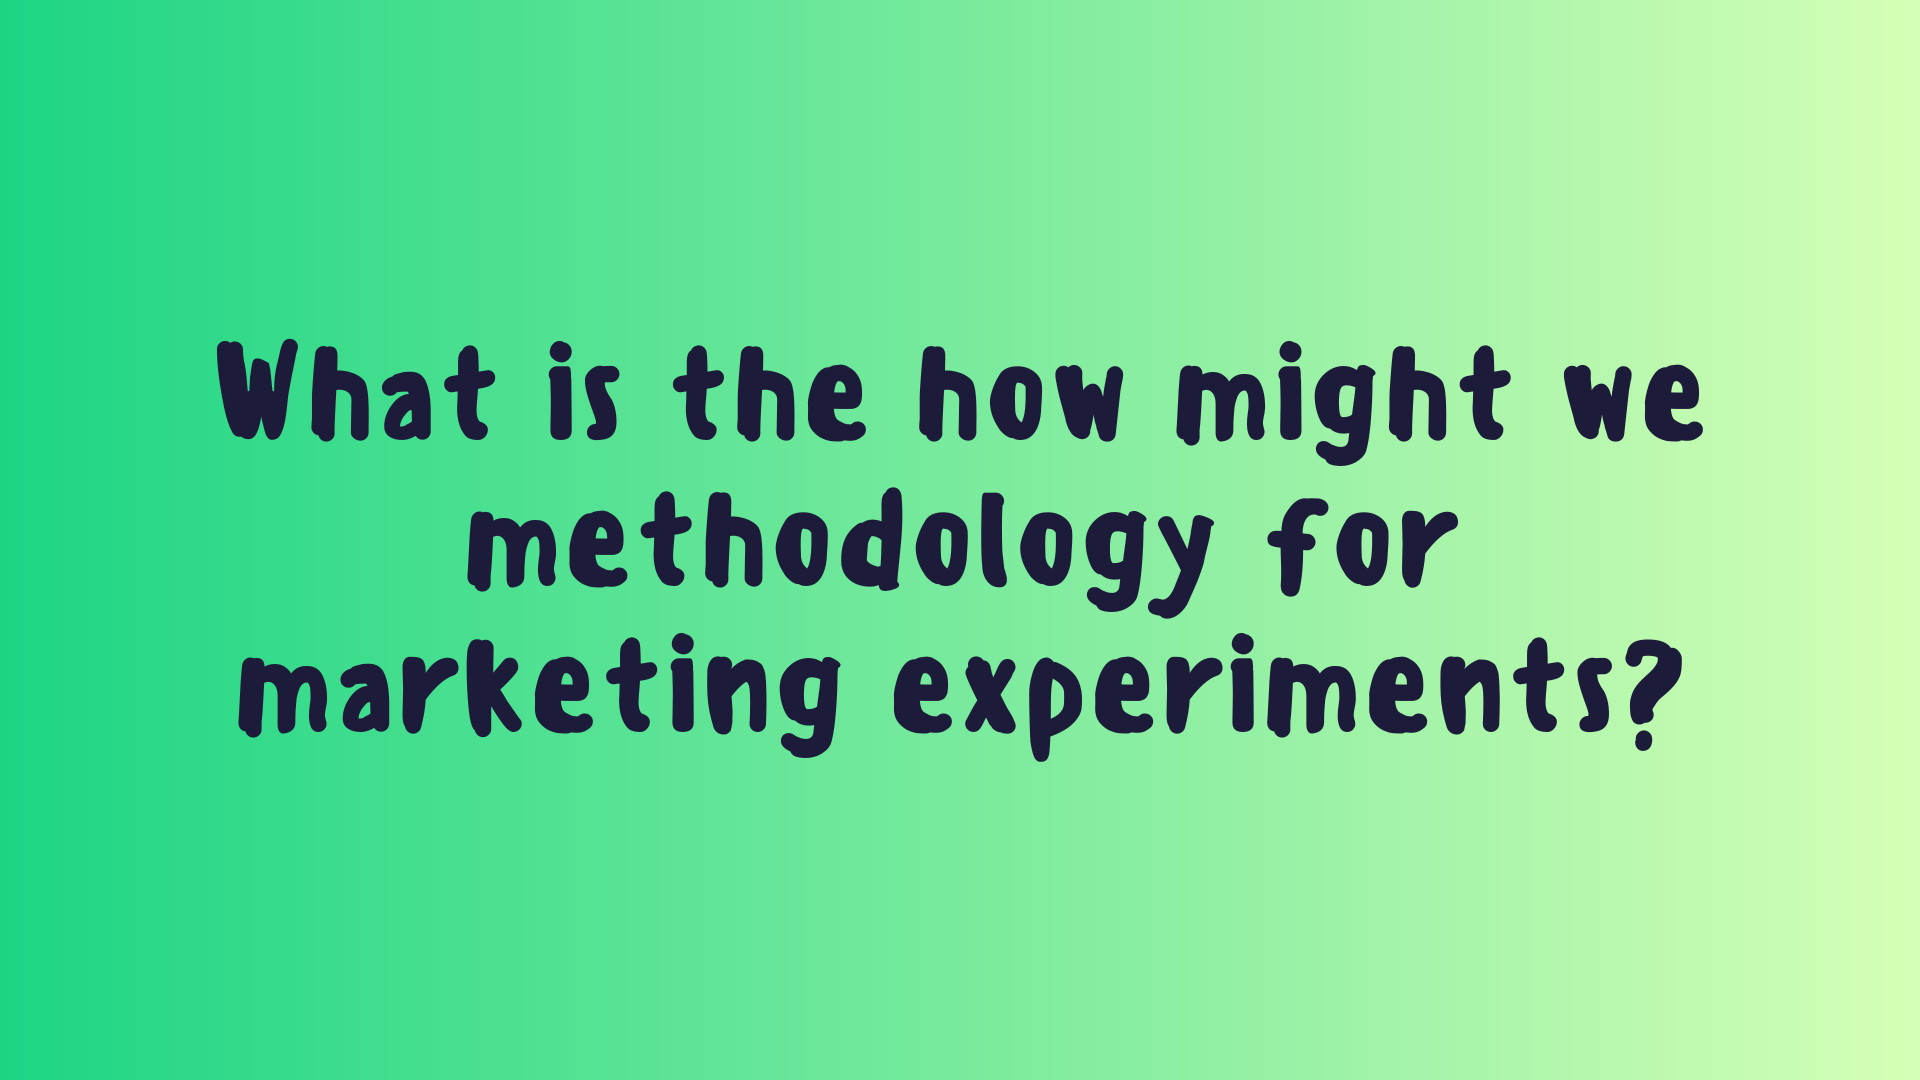 What is the how might we methodology for marketing experiments?